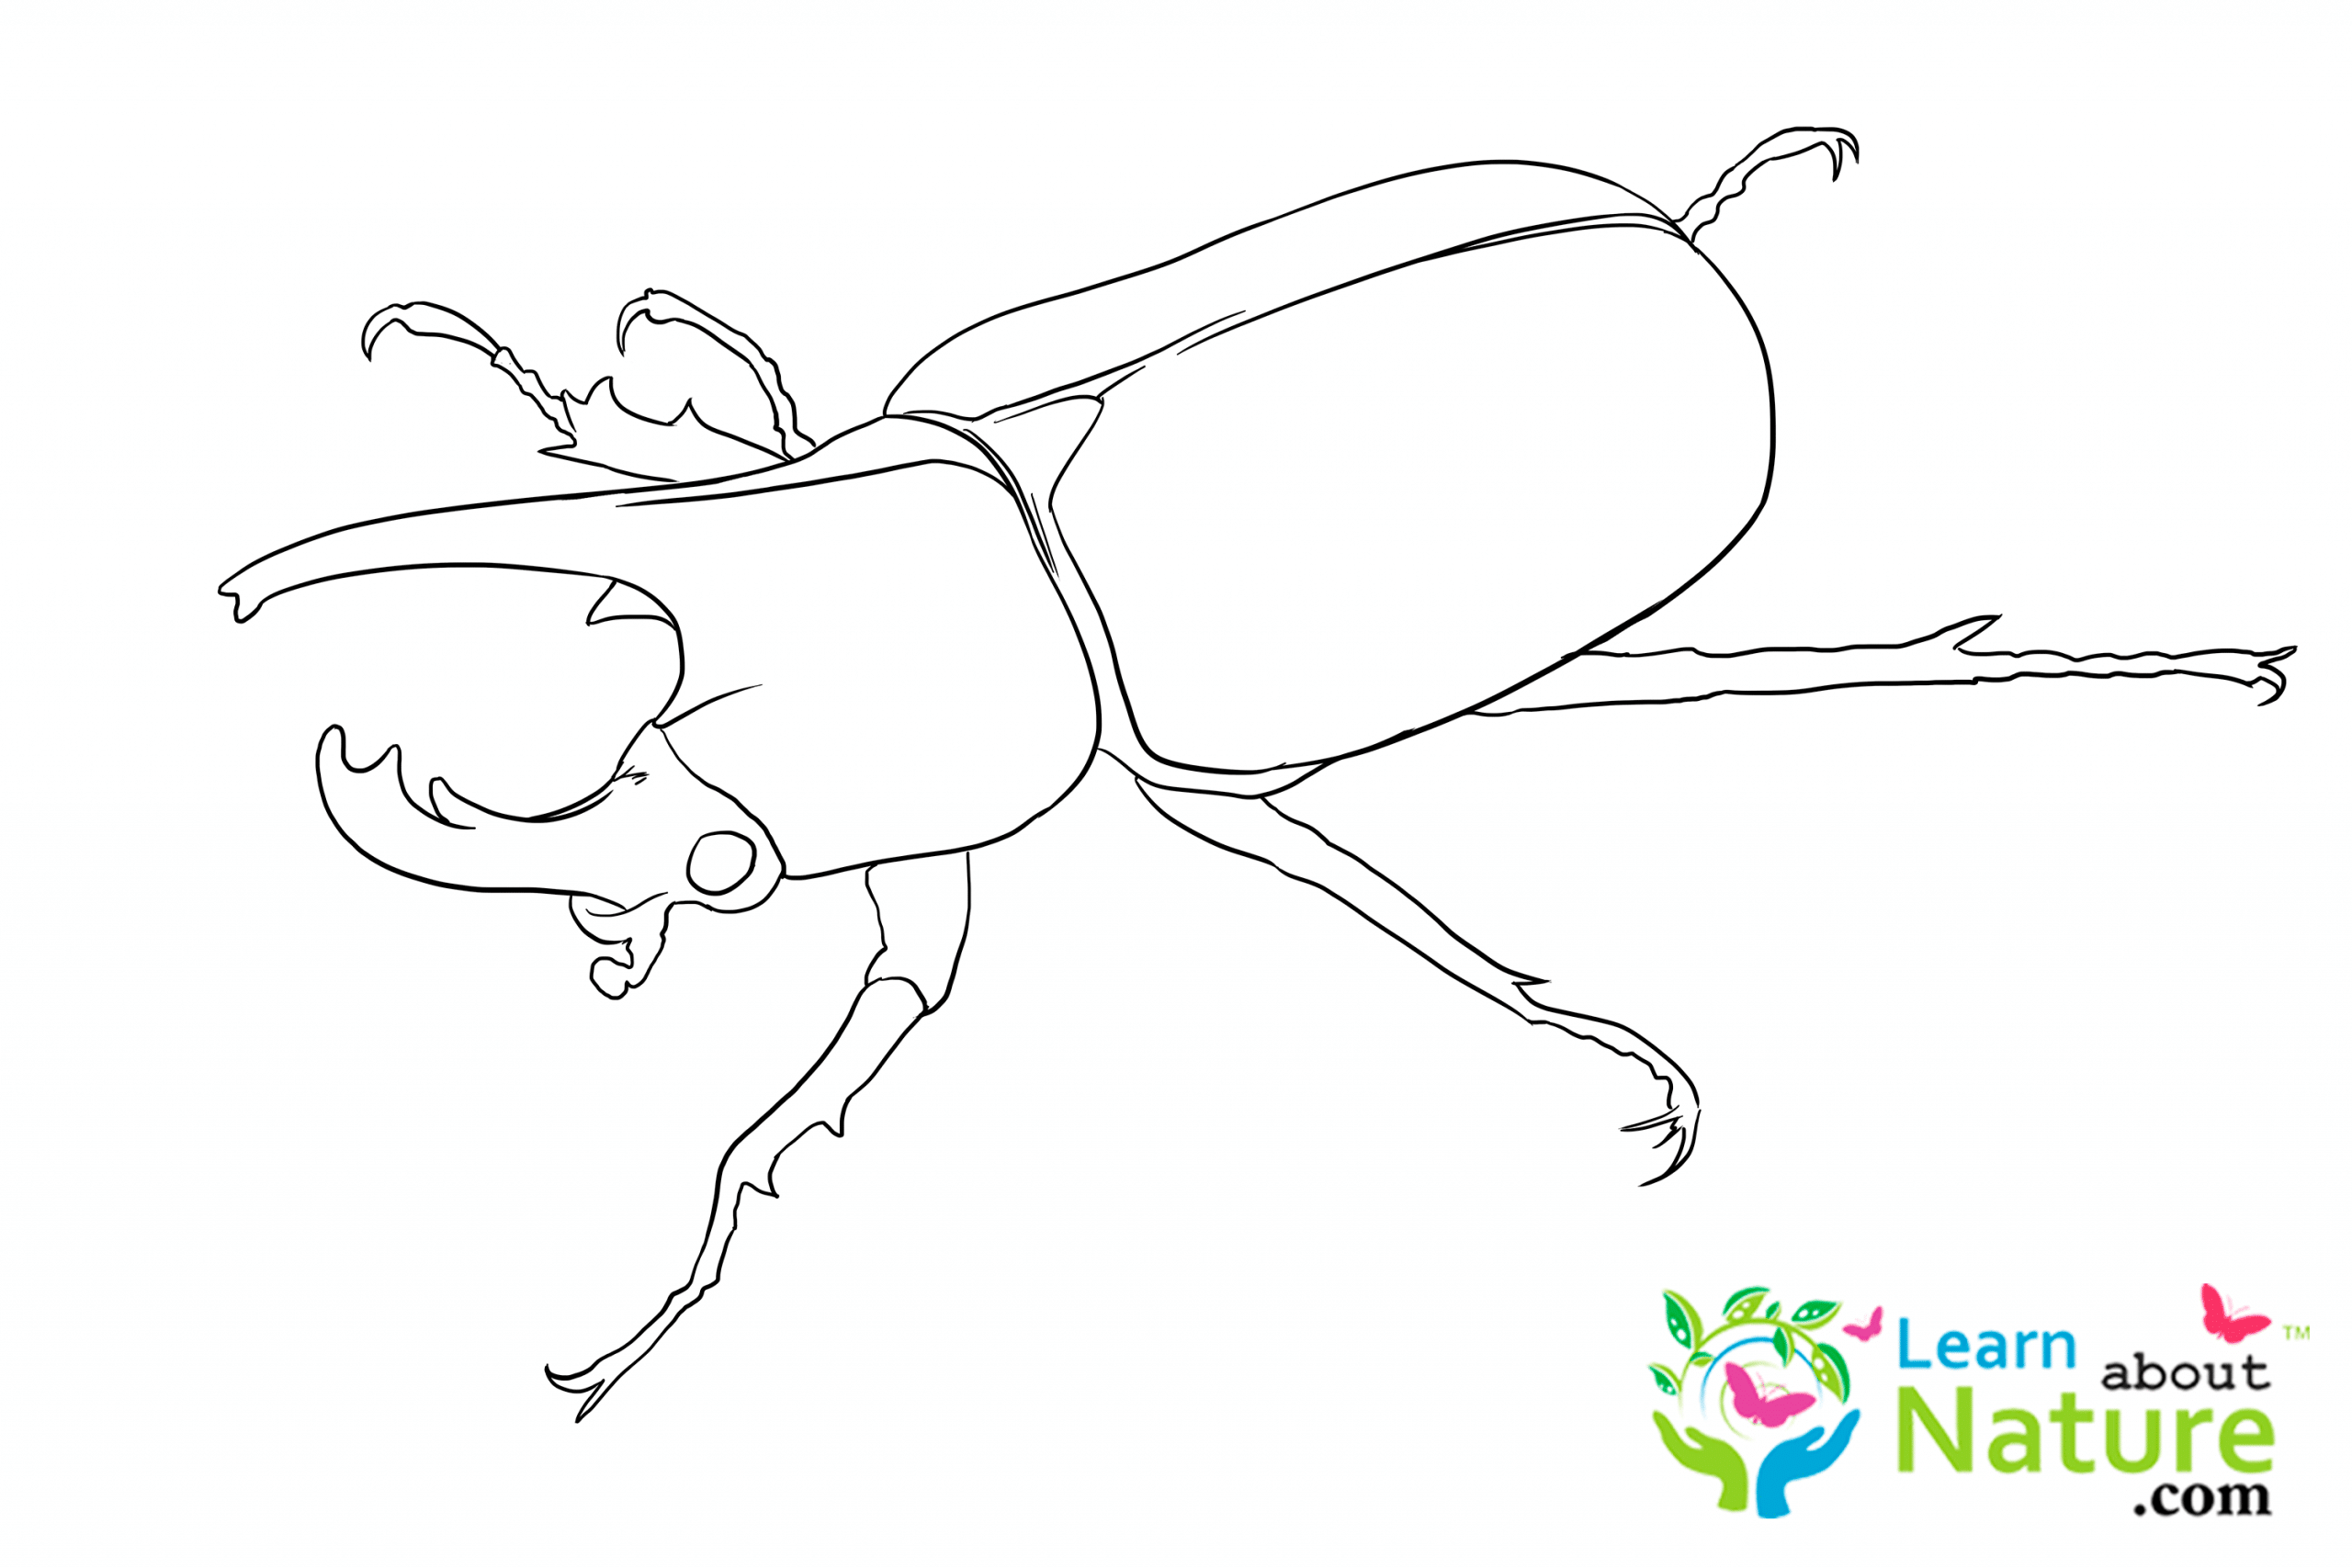 beetle-coloring-page-7 - Learn About Nature